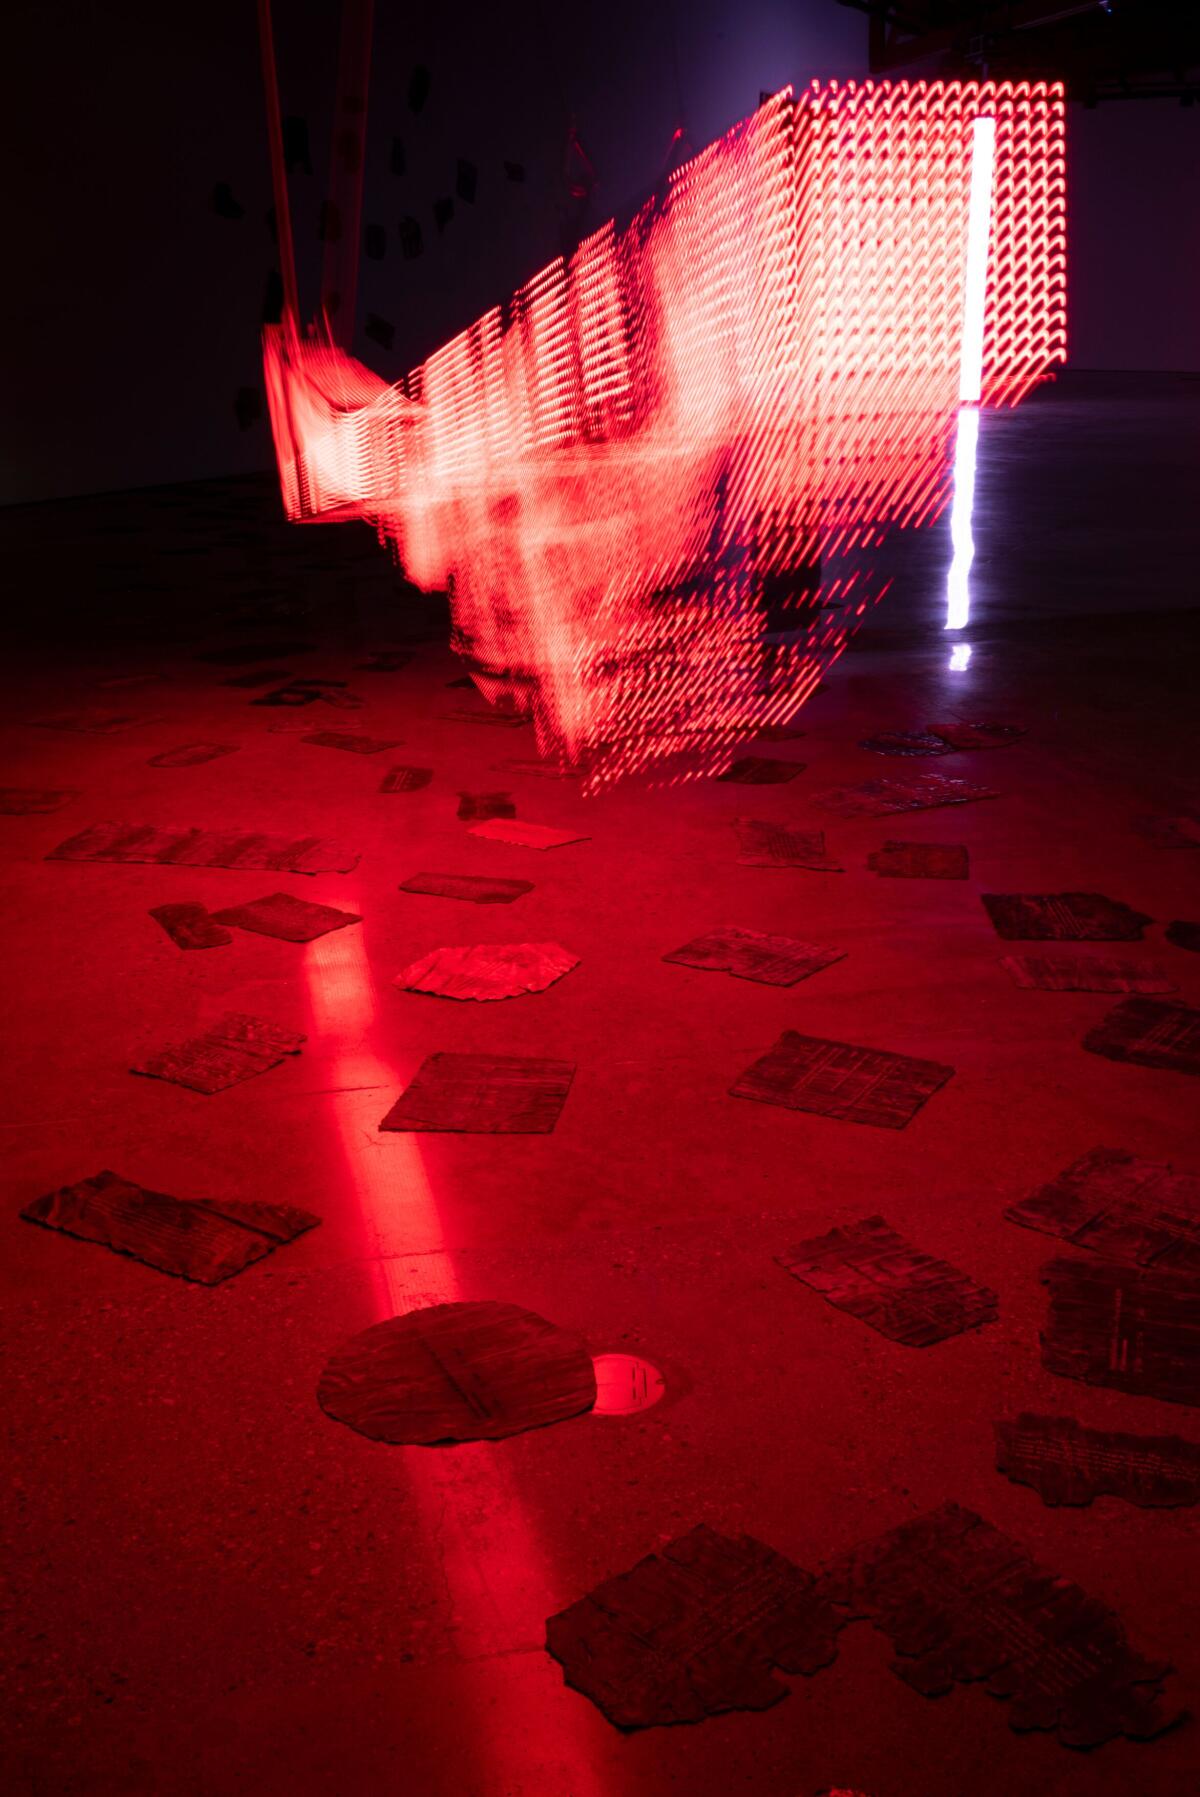 Image of a red LED installation.